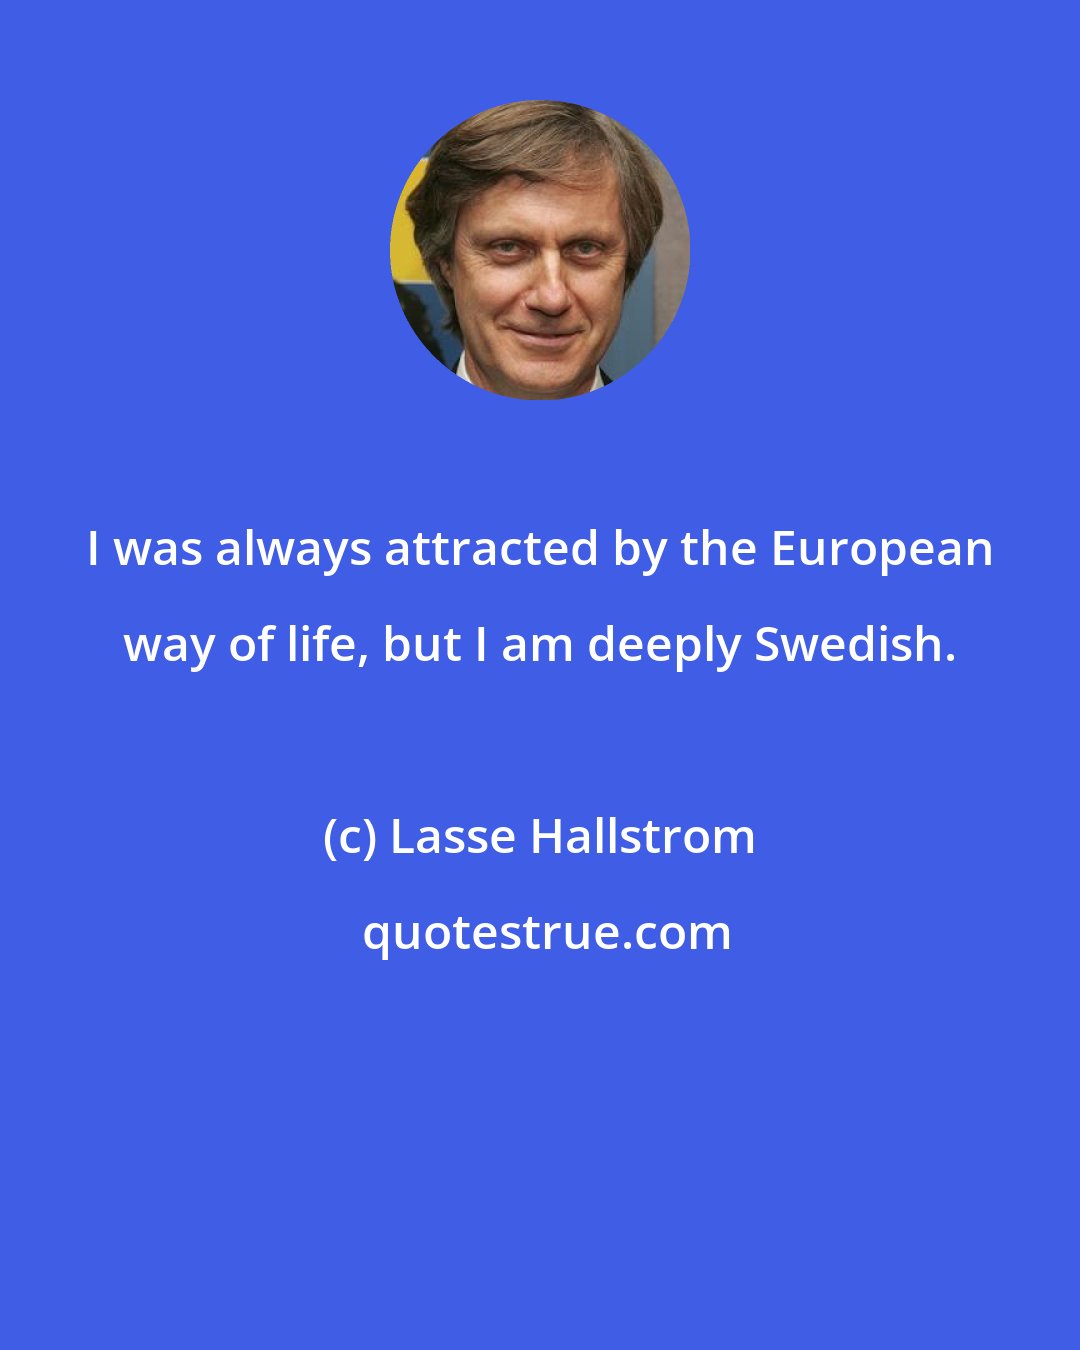 Lasse Hallstrom: I was always attracted by the European way of life, but I am deeply Swedish.